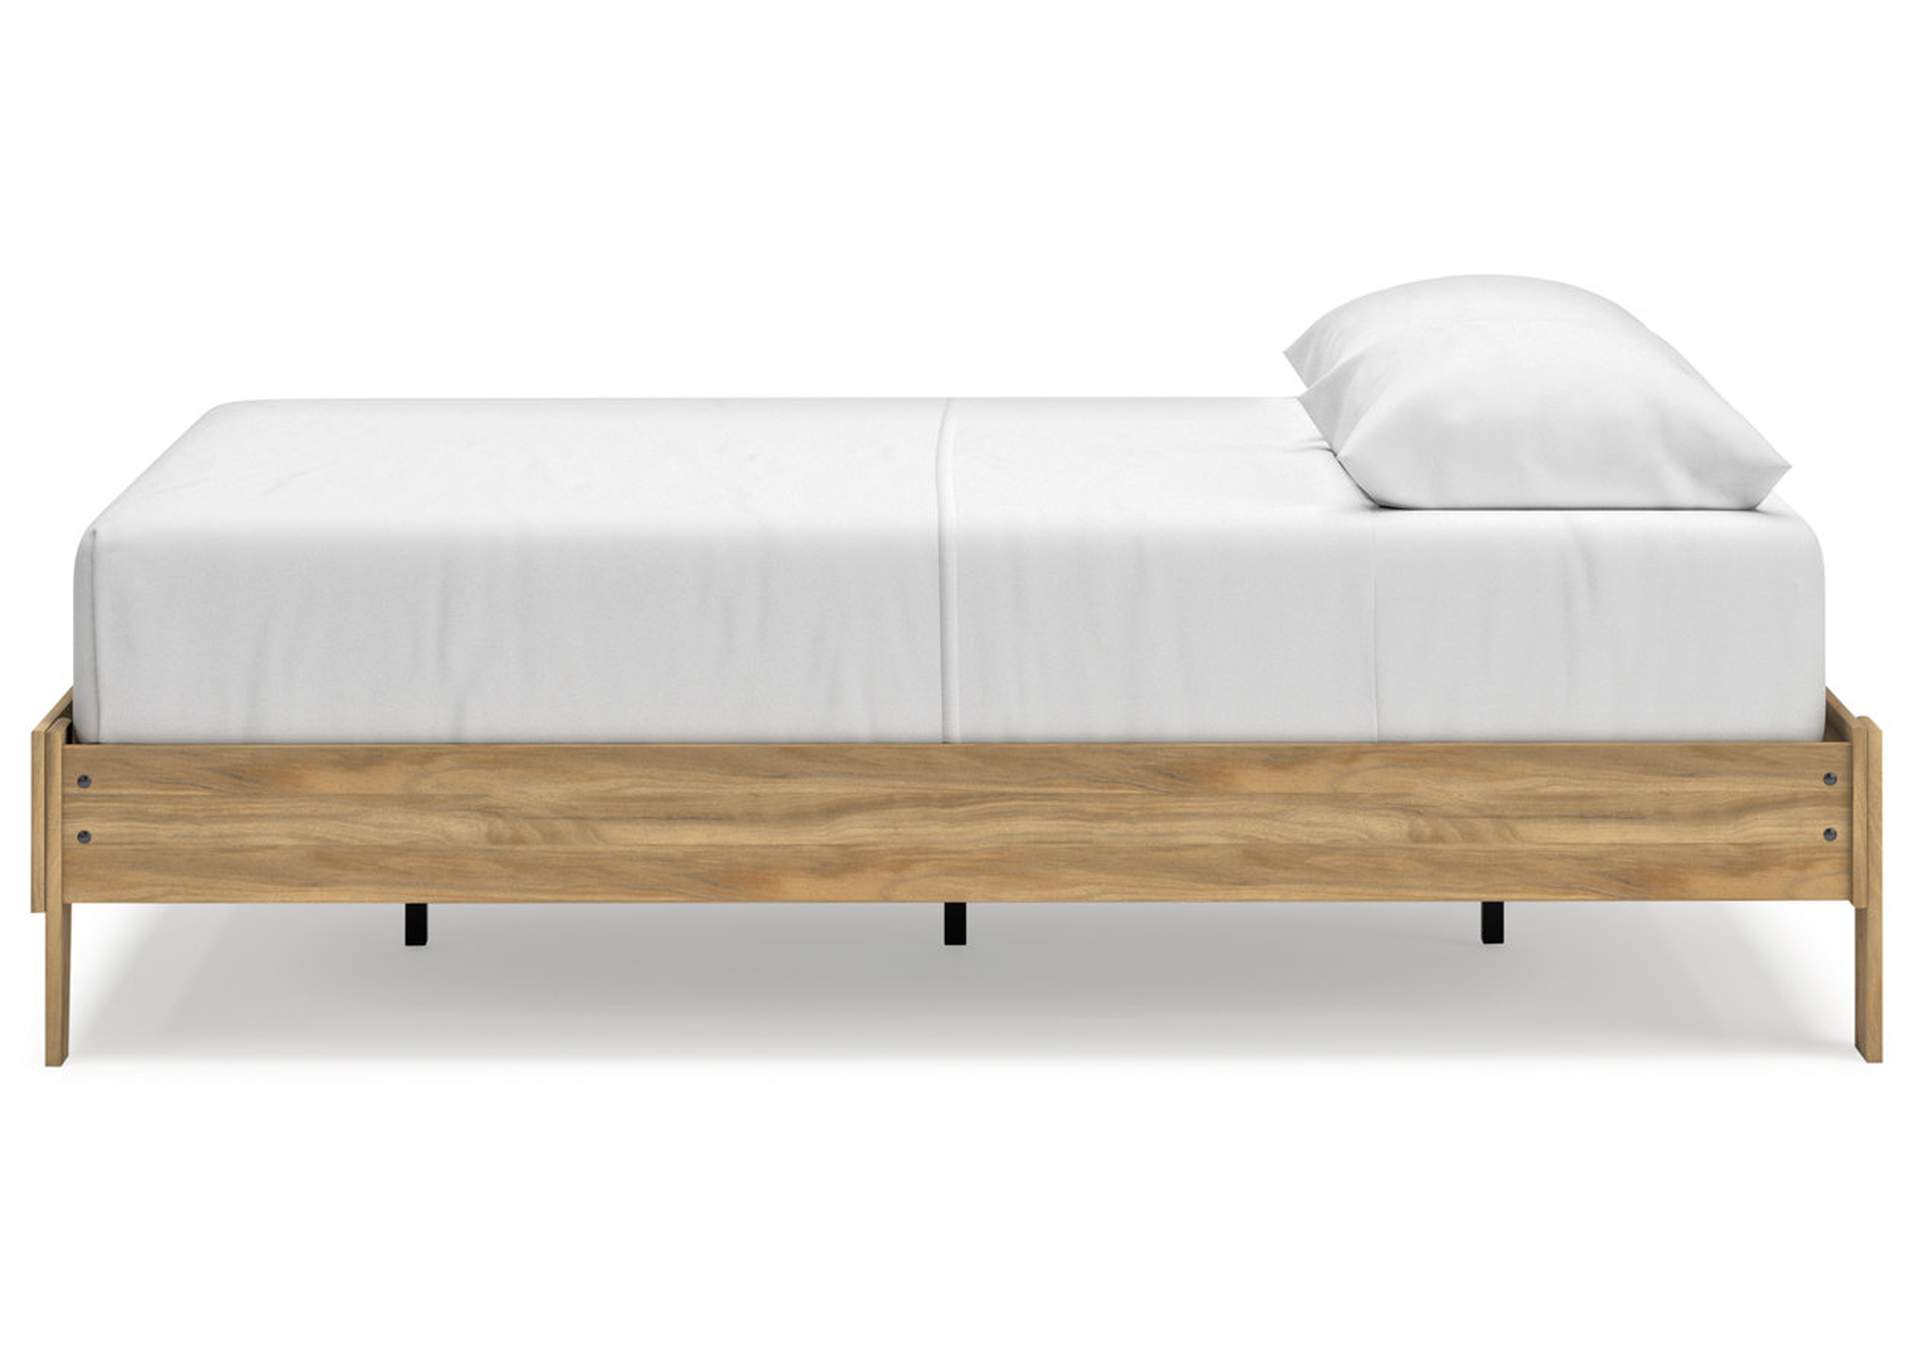 Bermacy Queen Platform Bed,Signature Design By Ashley